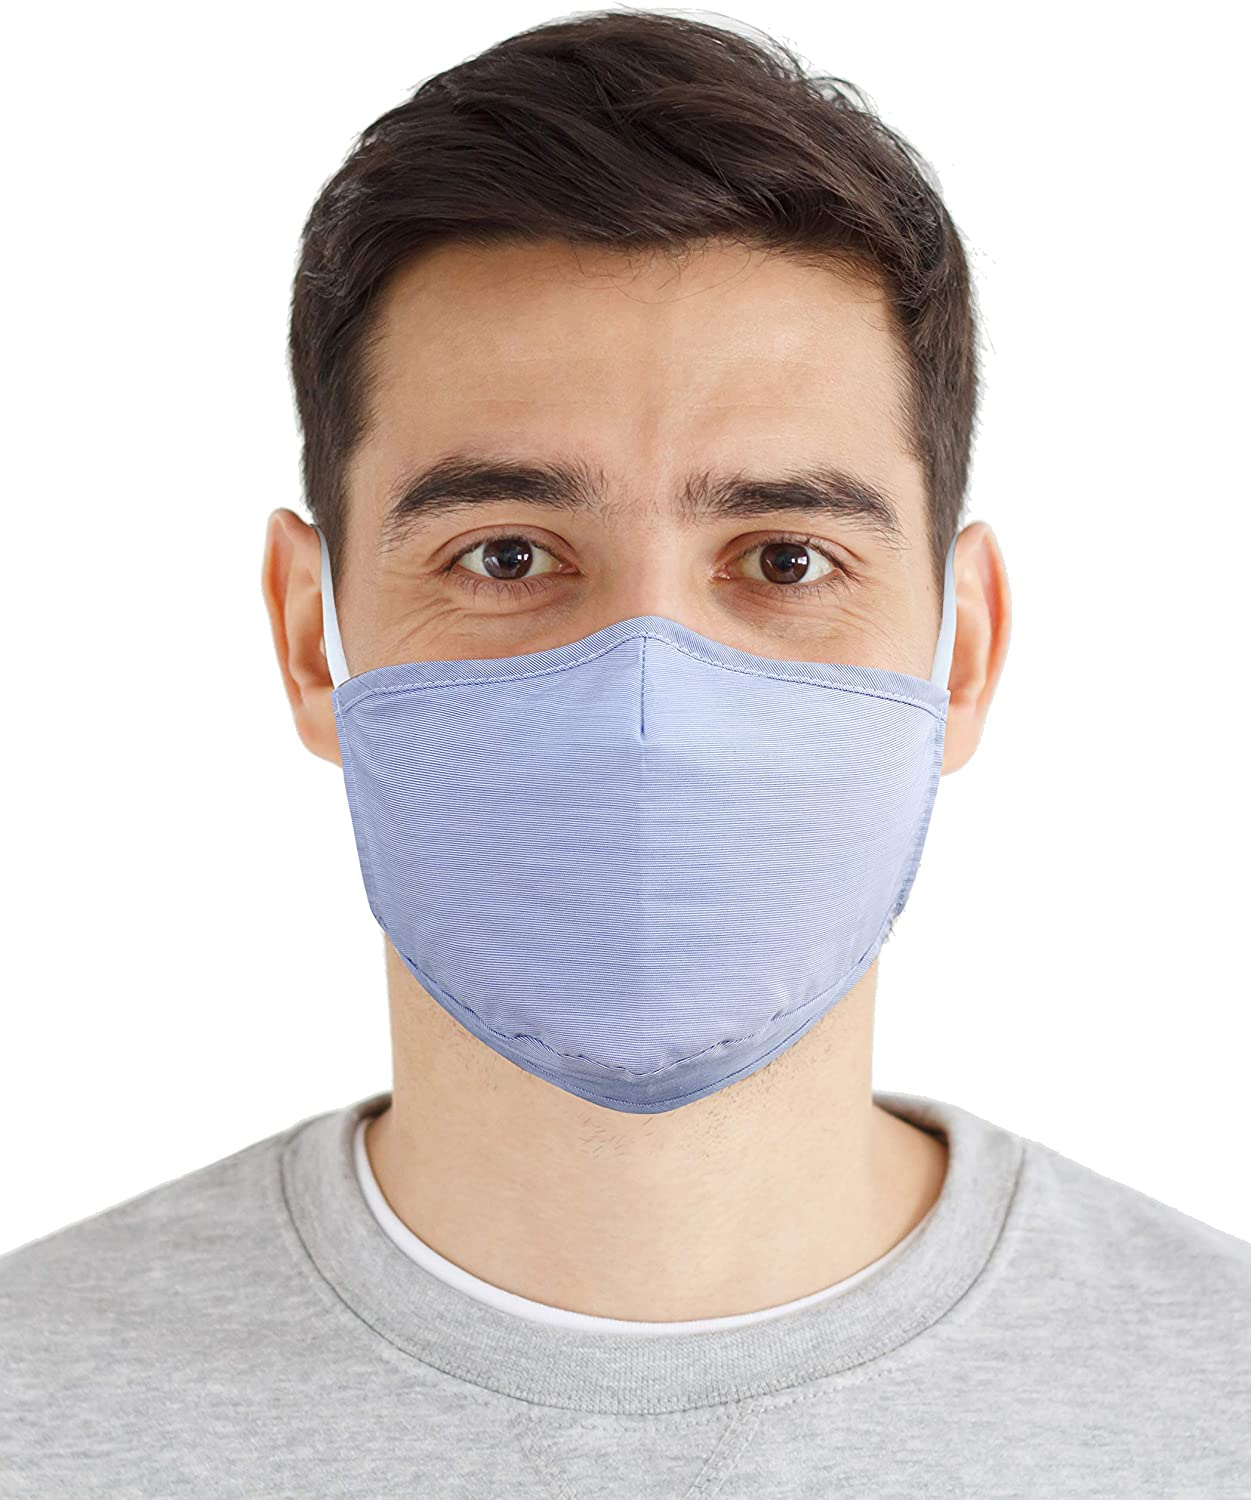 How can cloth masks help prevent COVID-19